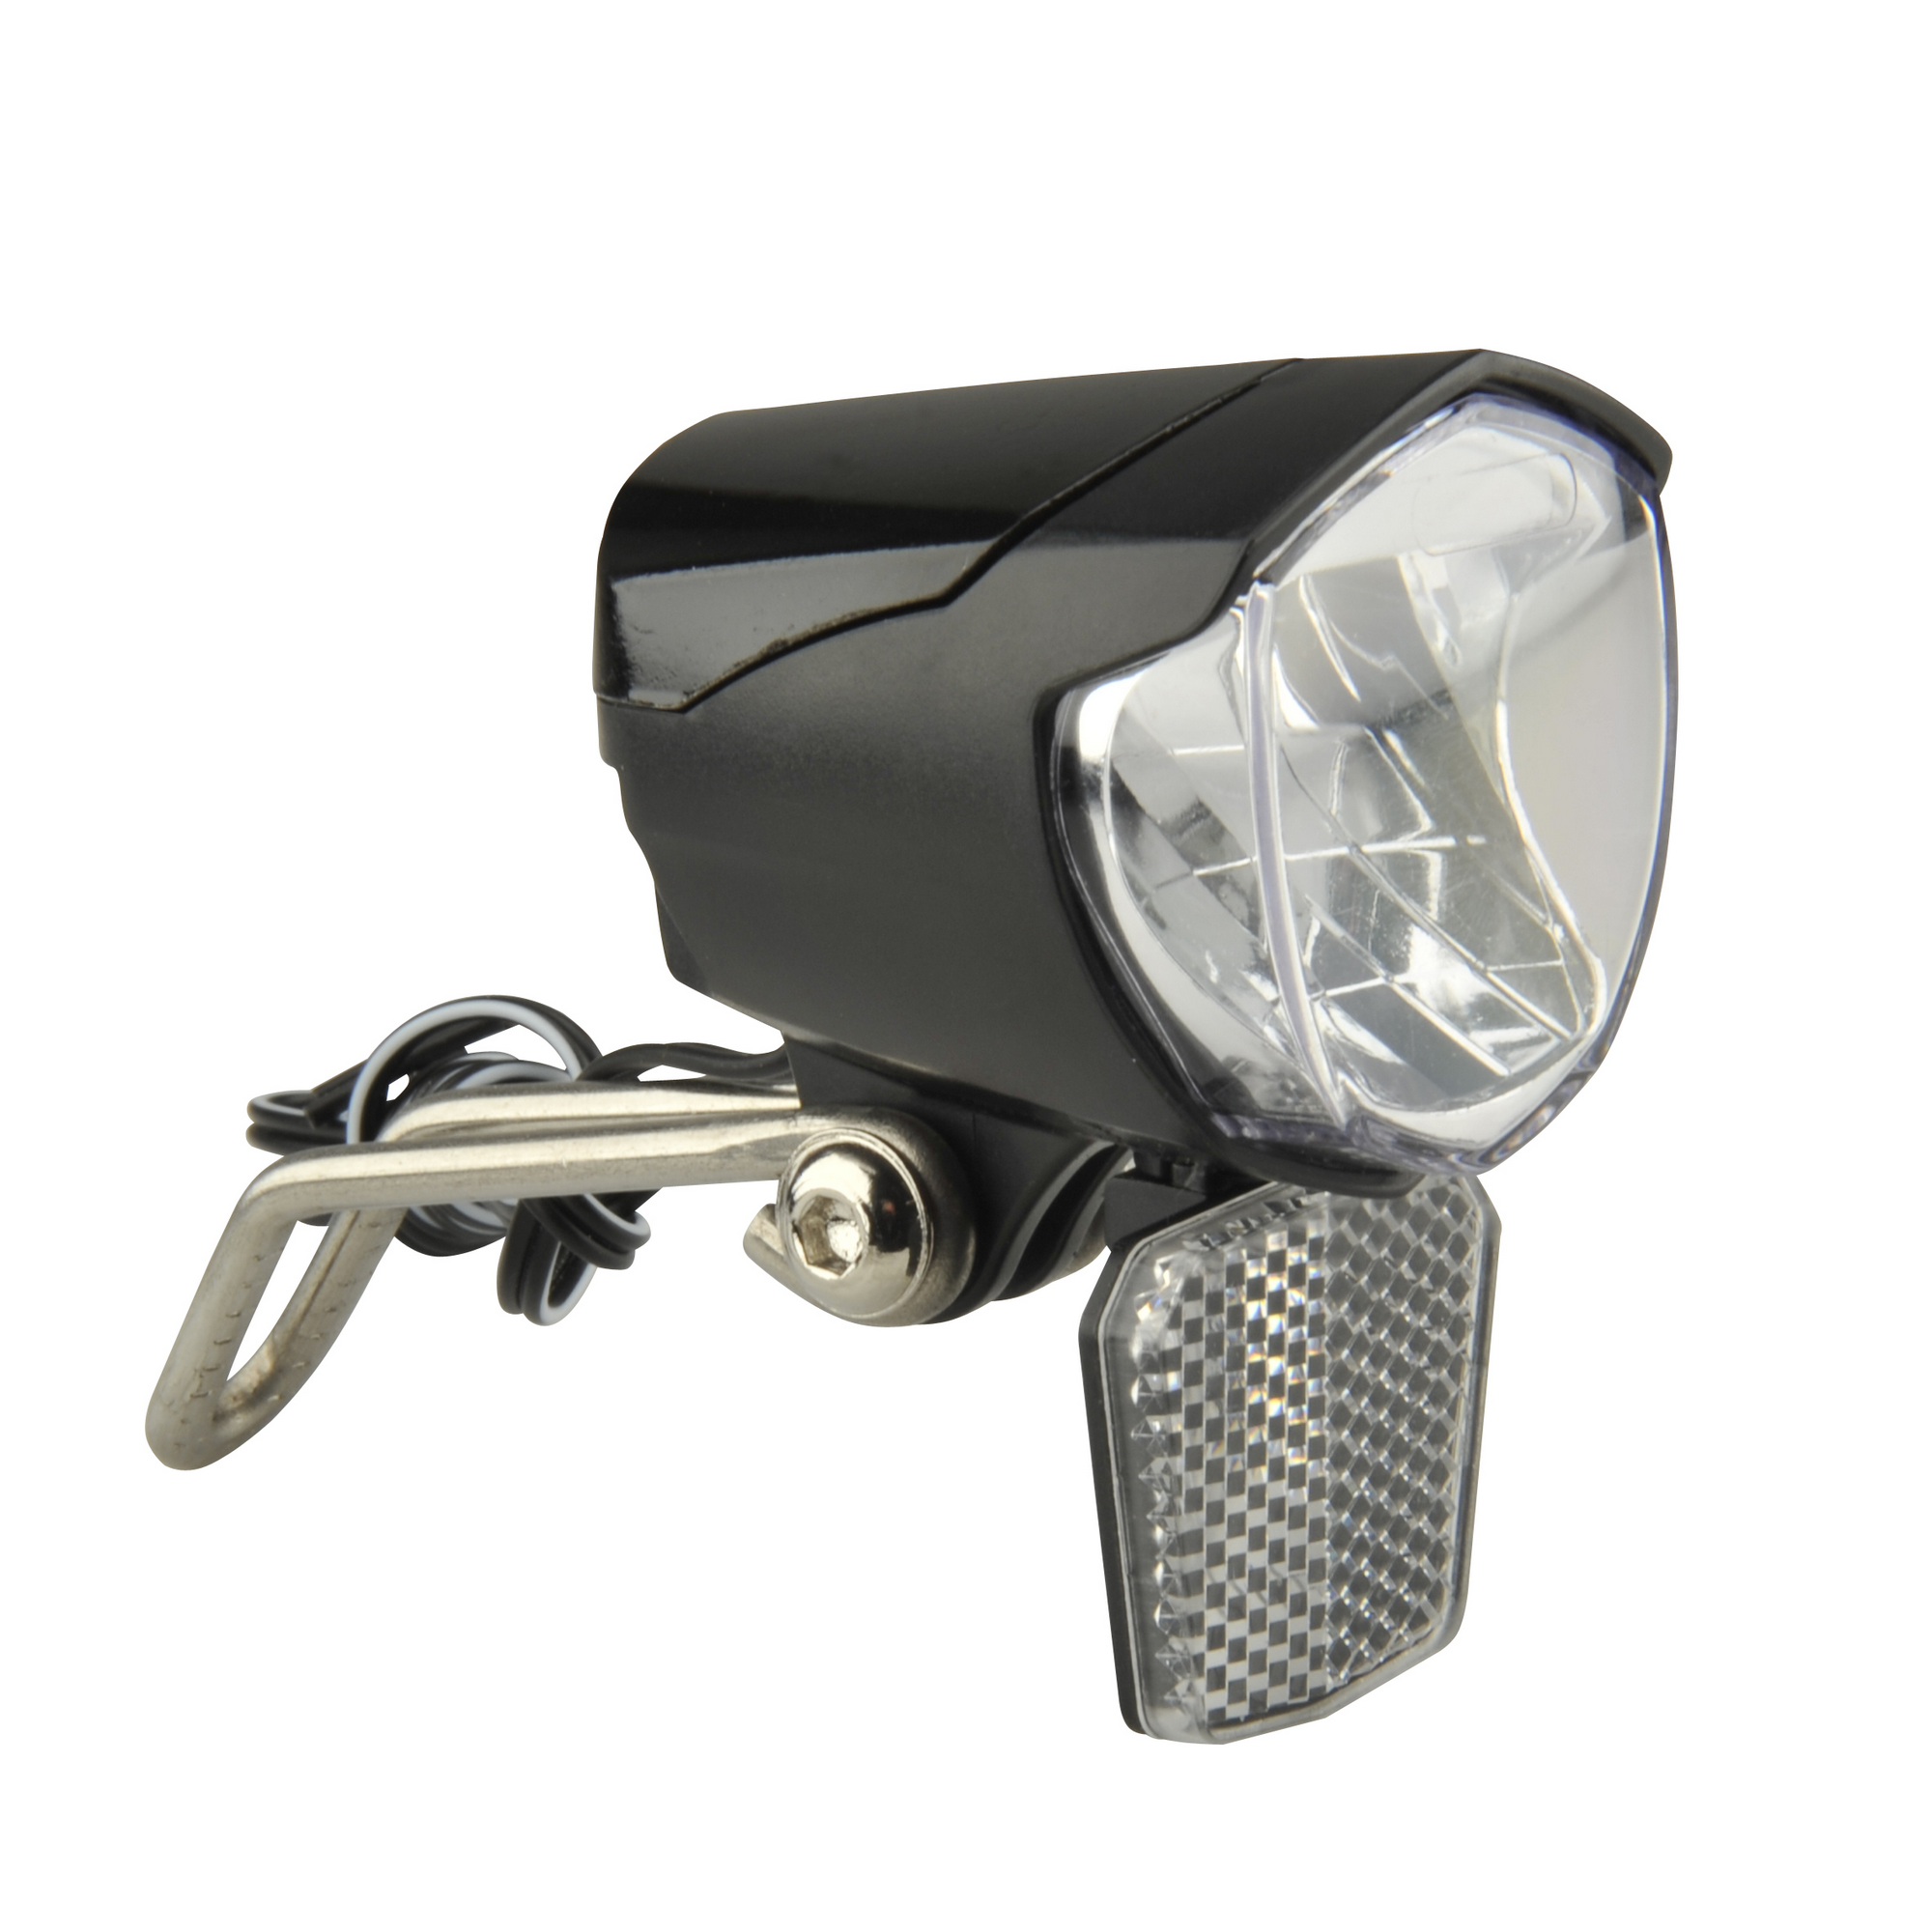 Fahrrad-LED-Scheinwerfer 70 Lux + product picture